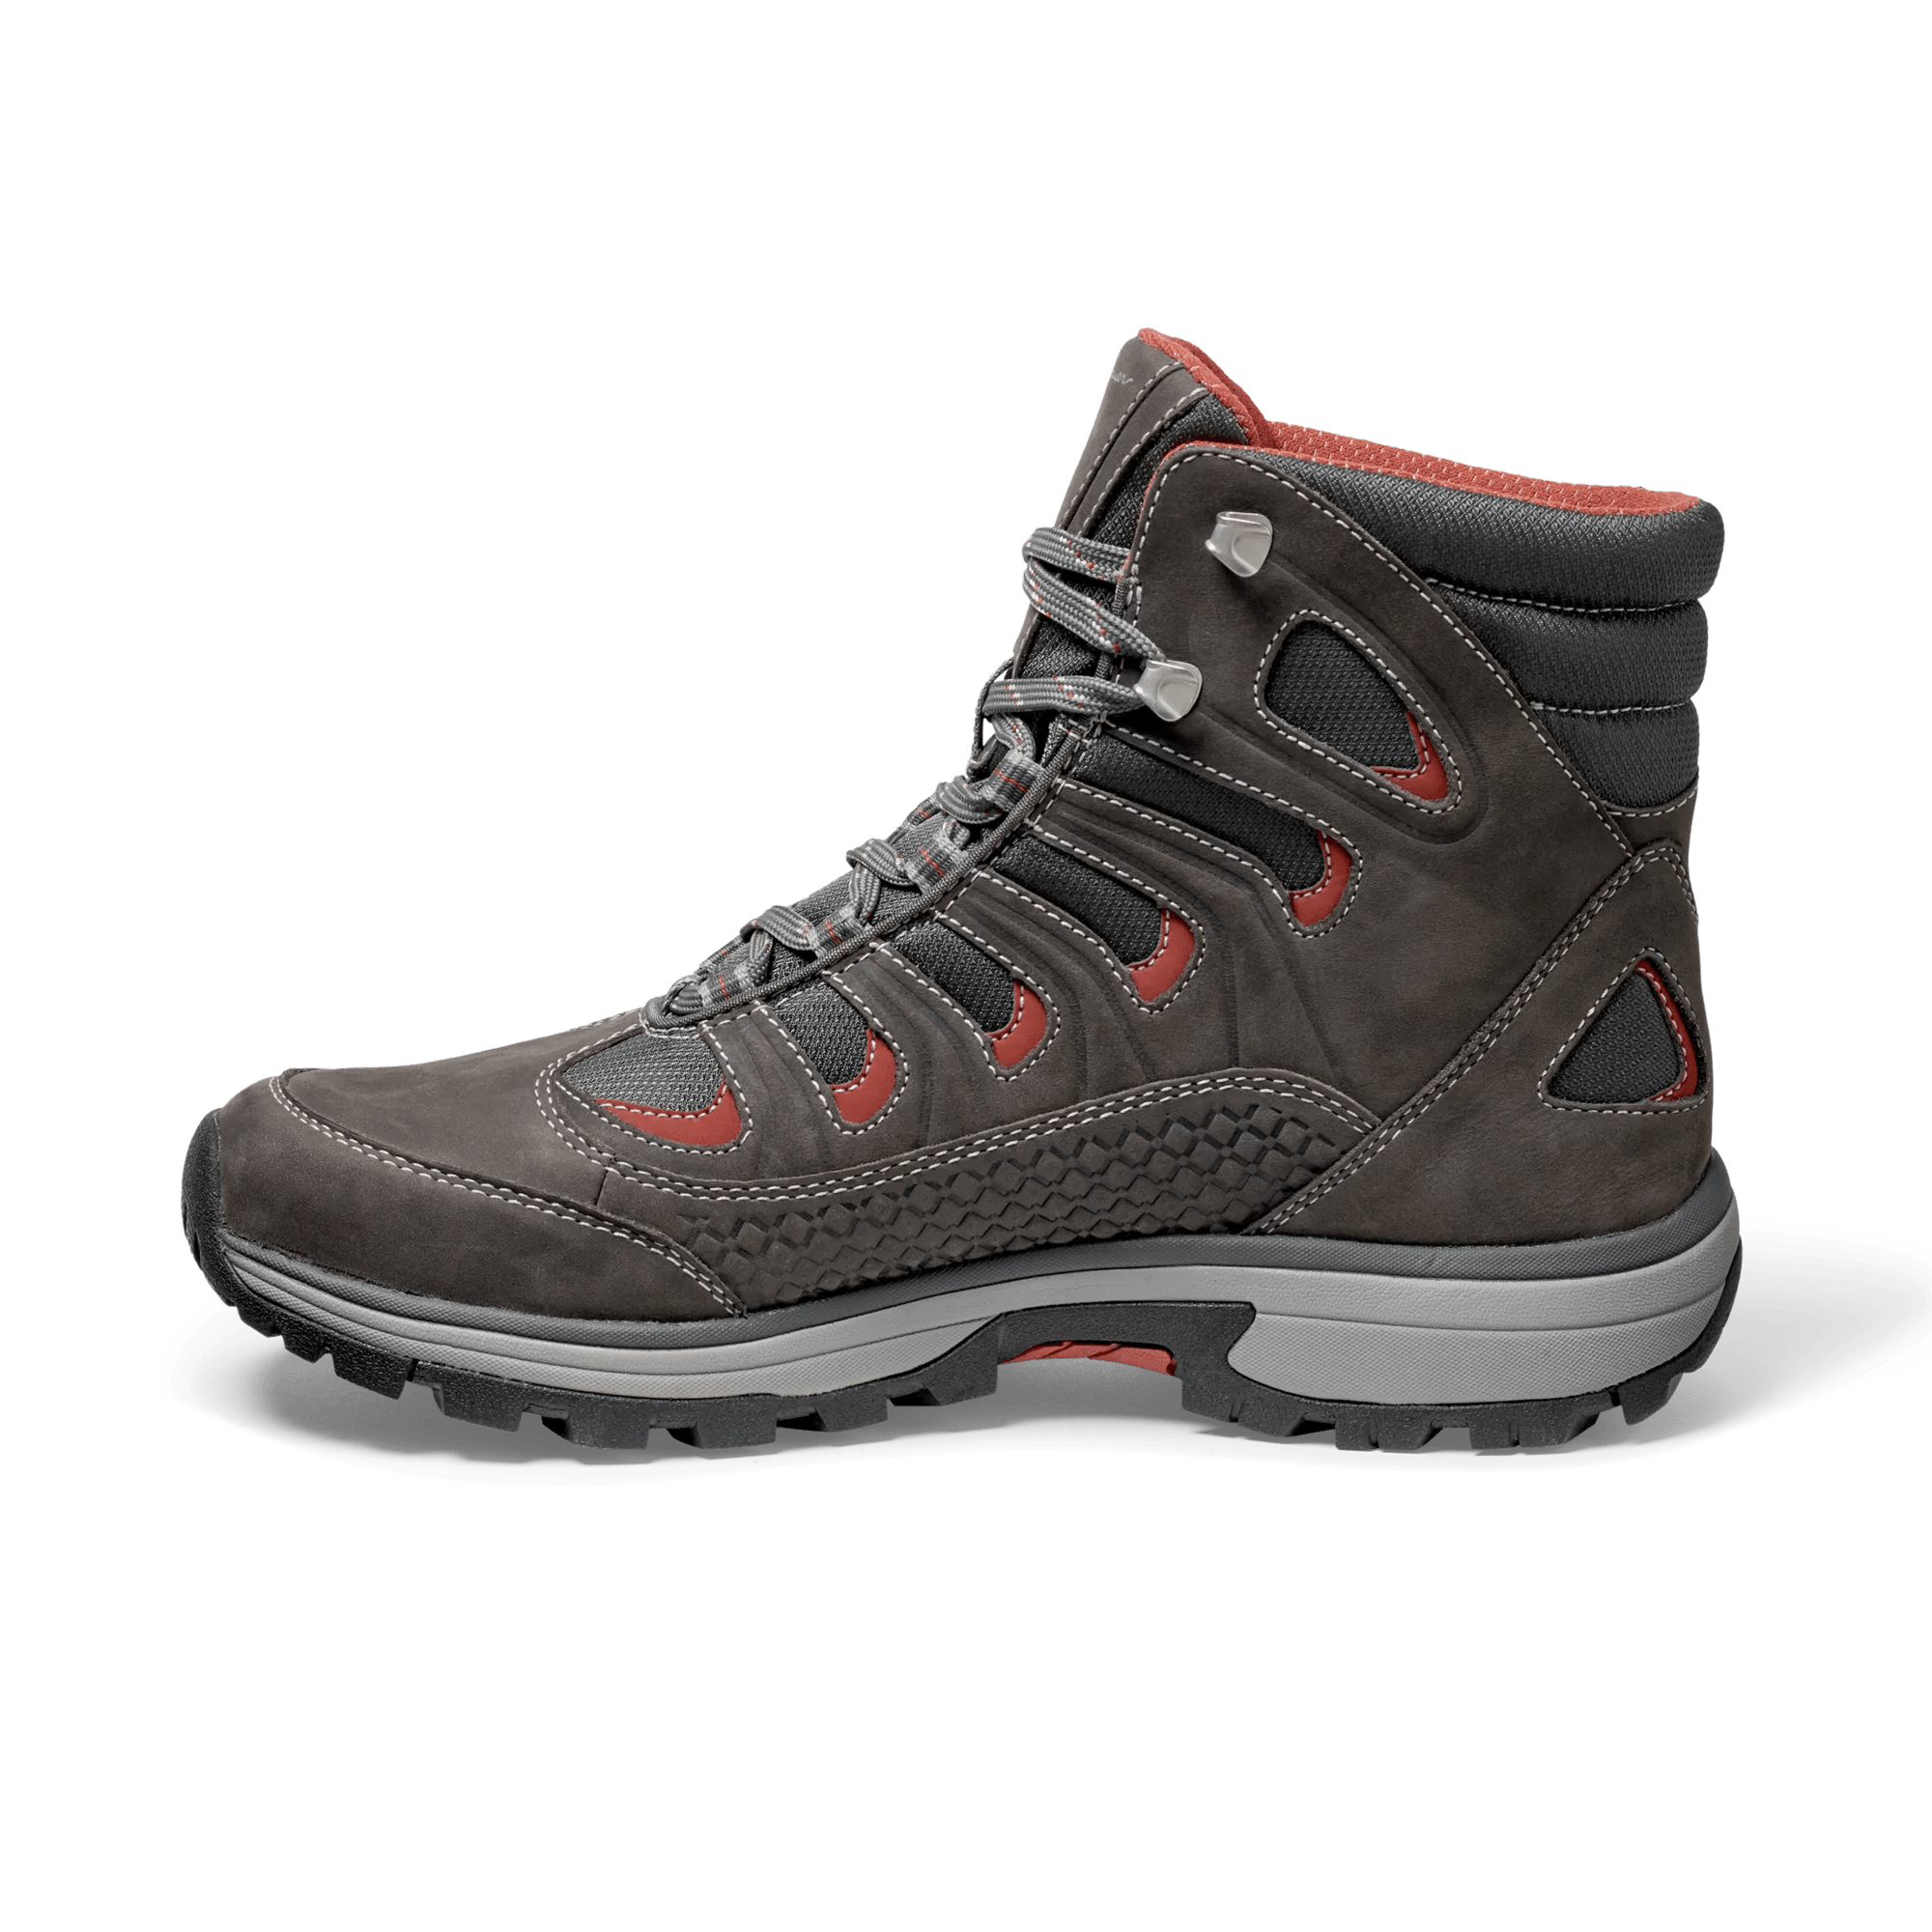 Guide Pro Hiking Boots